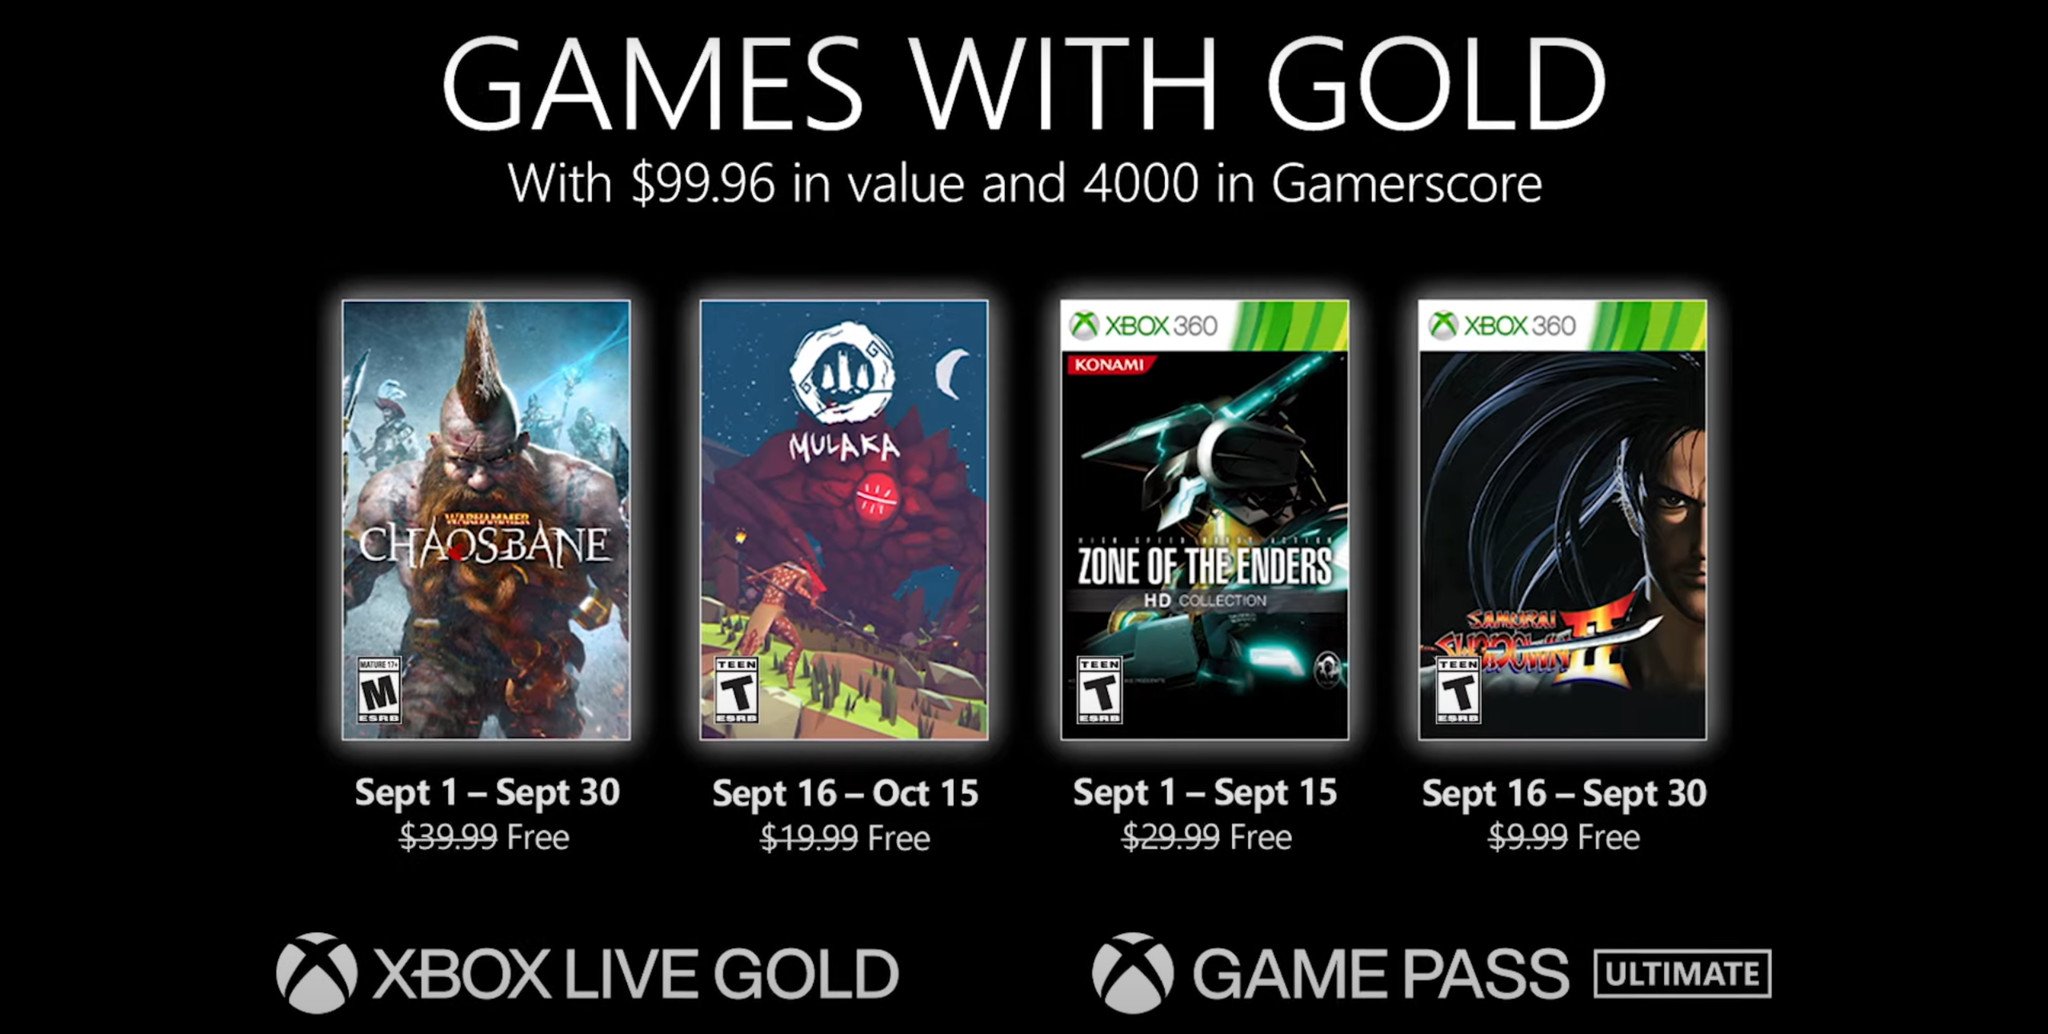 xbox-games-with-gold-september-2021-01.jpg